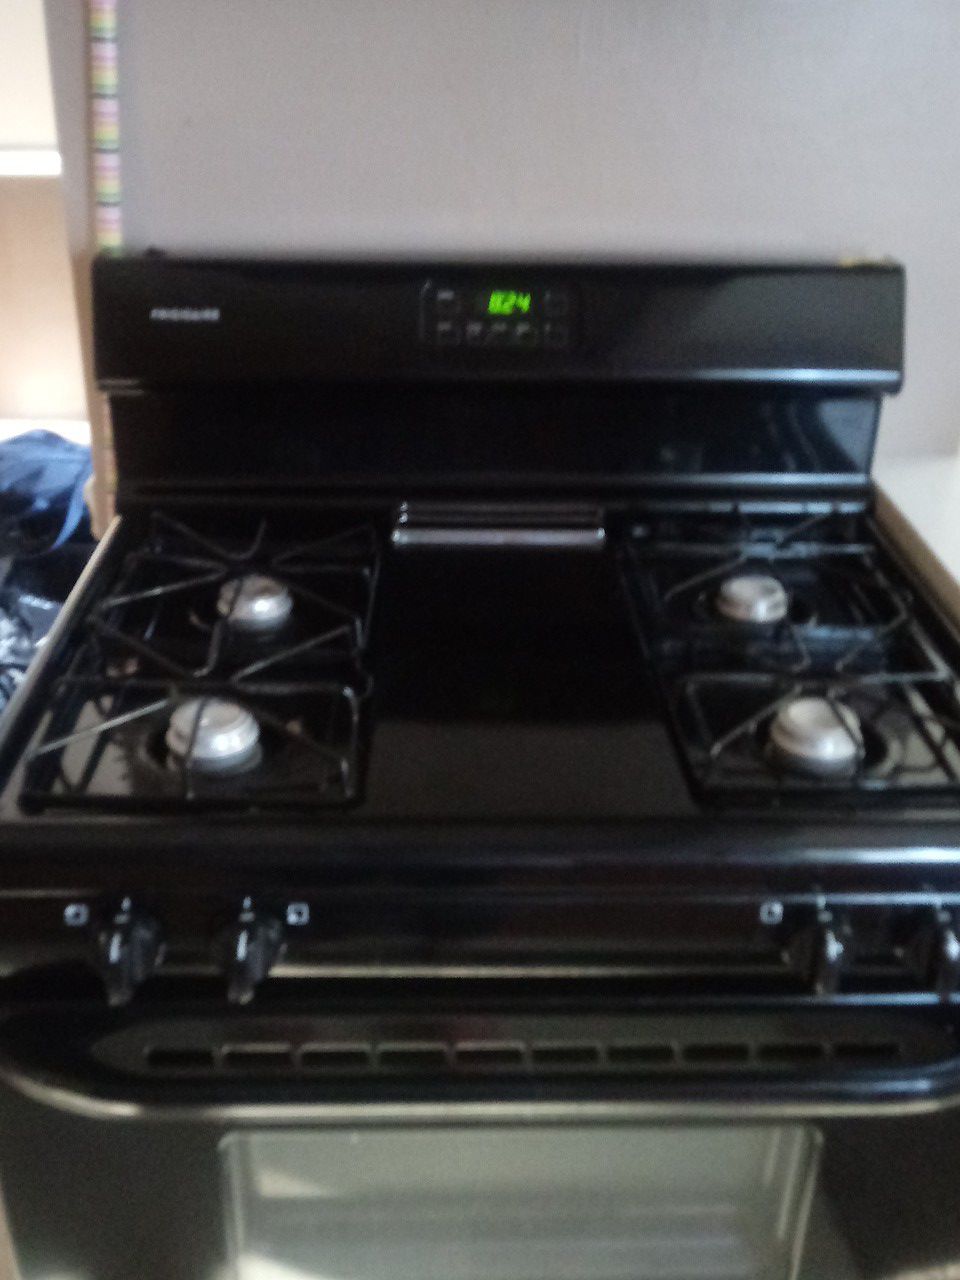 Frigidaire gas stove less then 2 yrs old. Must be picked up